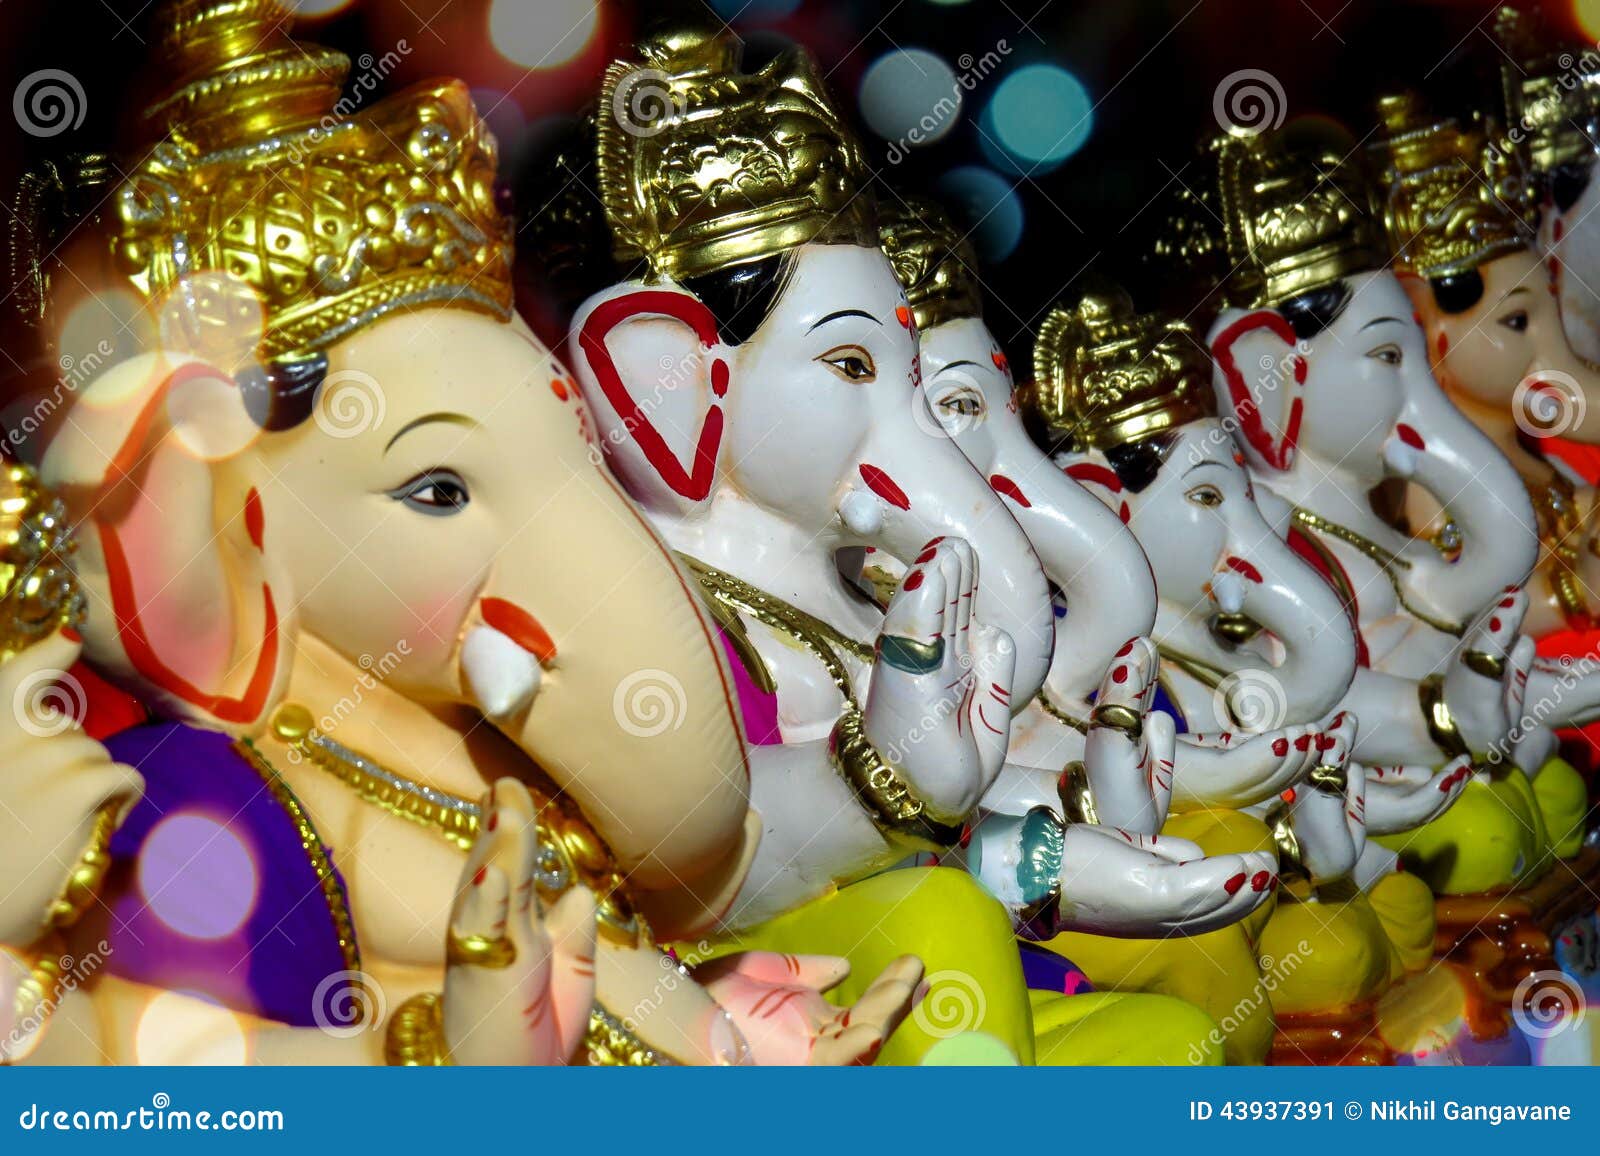 Ganesha on sale stock image. Image of sculptures, tradition - 43937391